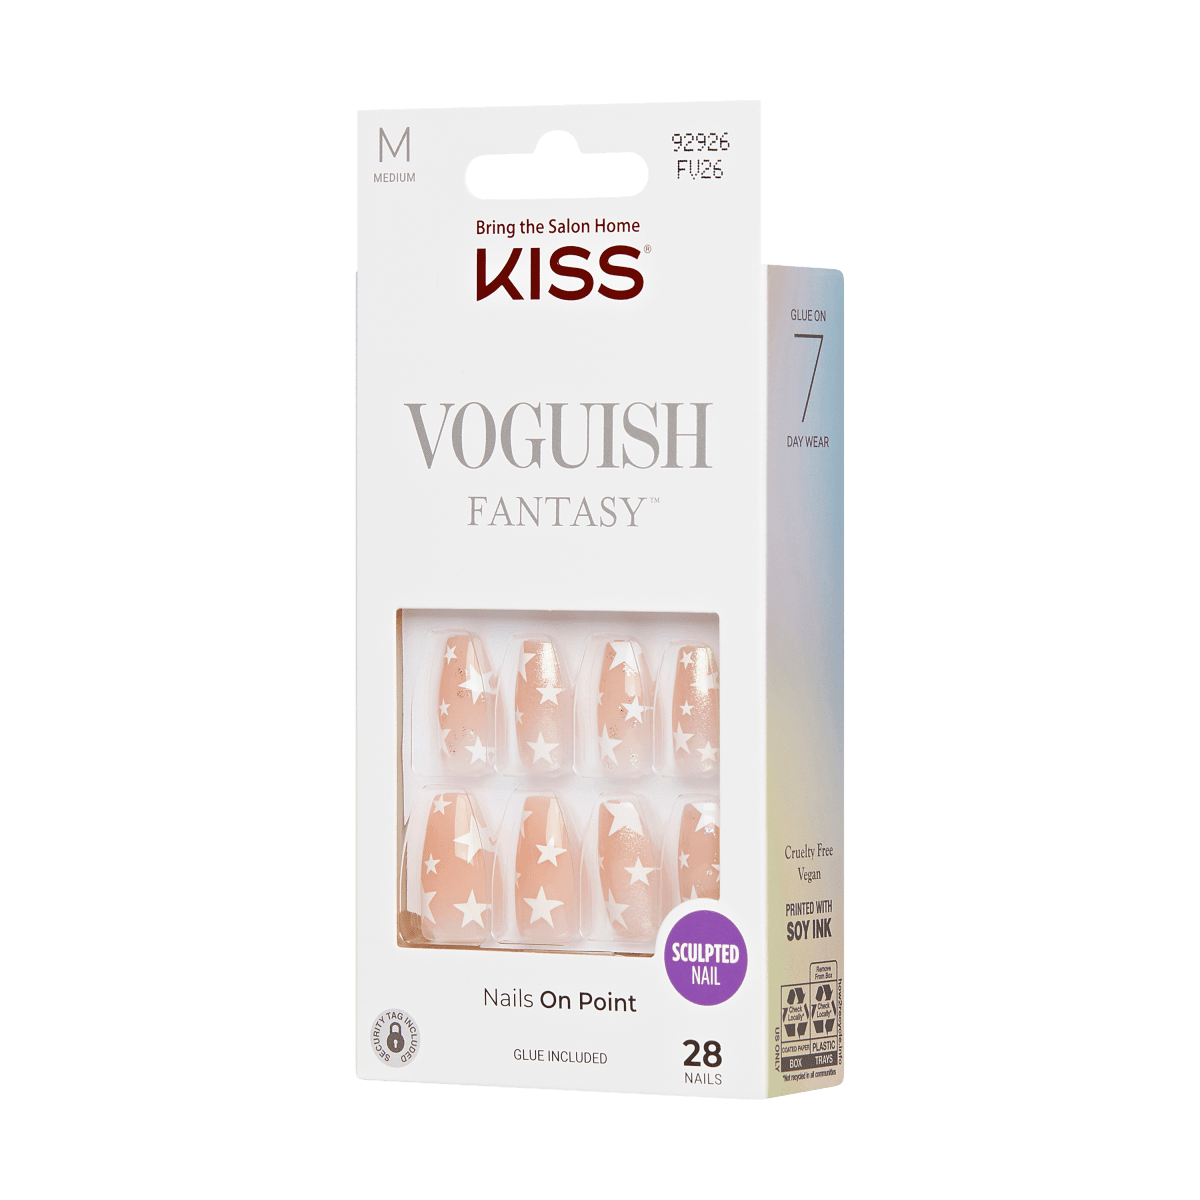 KISS Voguish Fantasy, Press-On Nails, To The Sea, Nude, Med Coffin, 28 ...